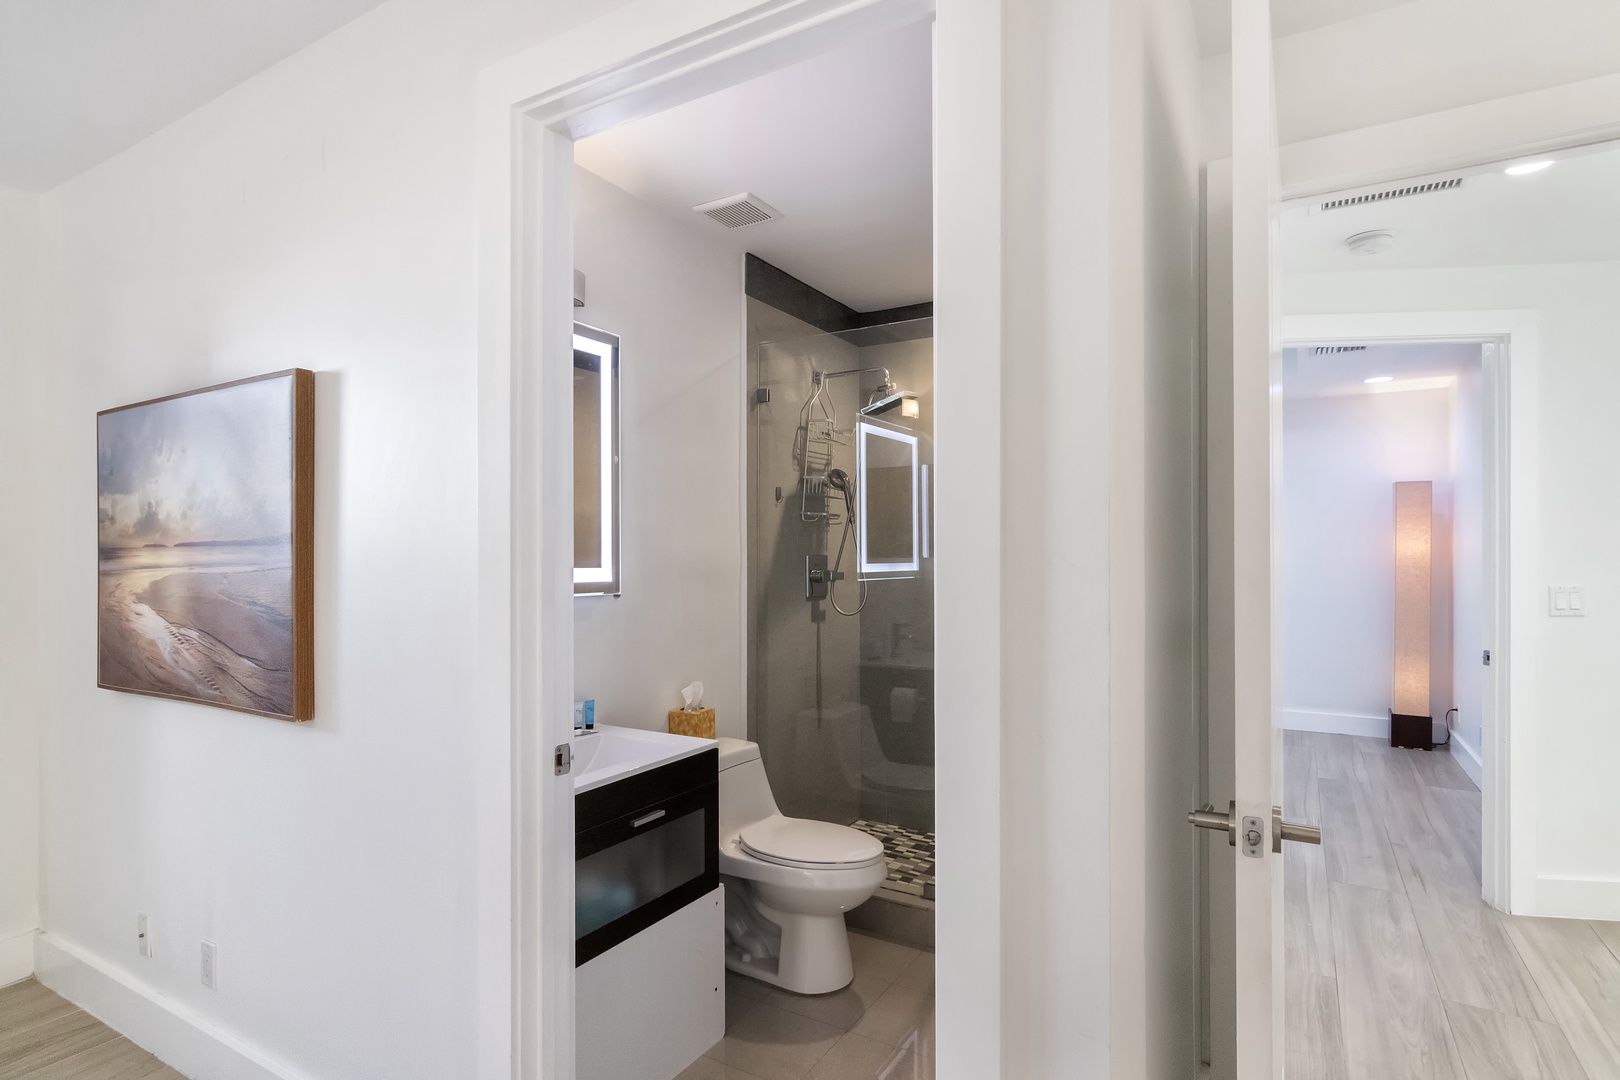 A single vanity & luxurious glass shower await in this 1st-floor ensuite